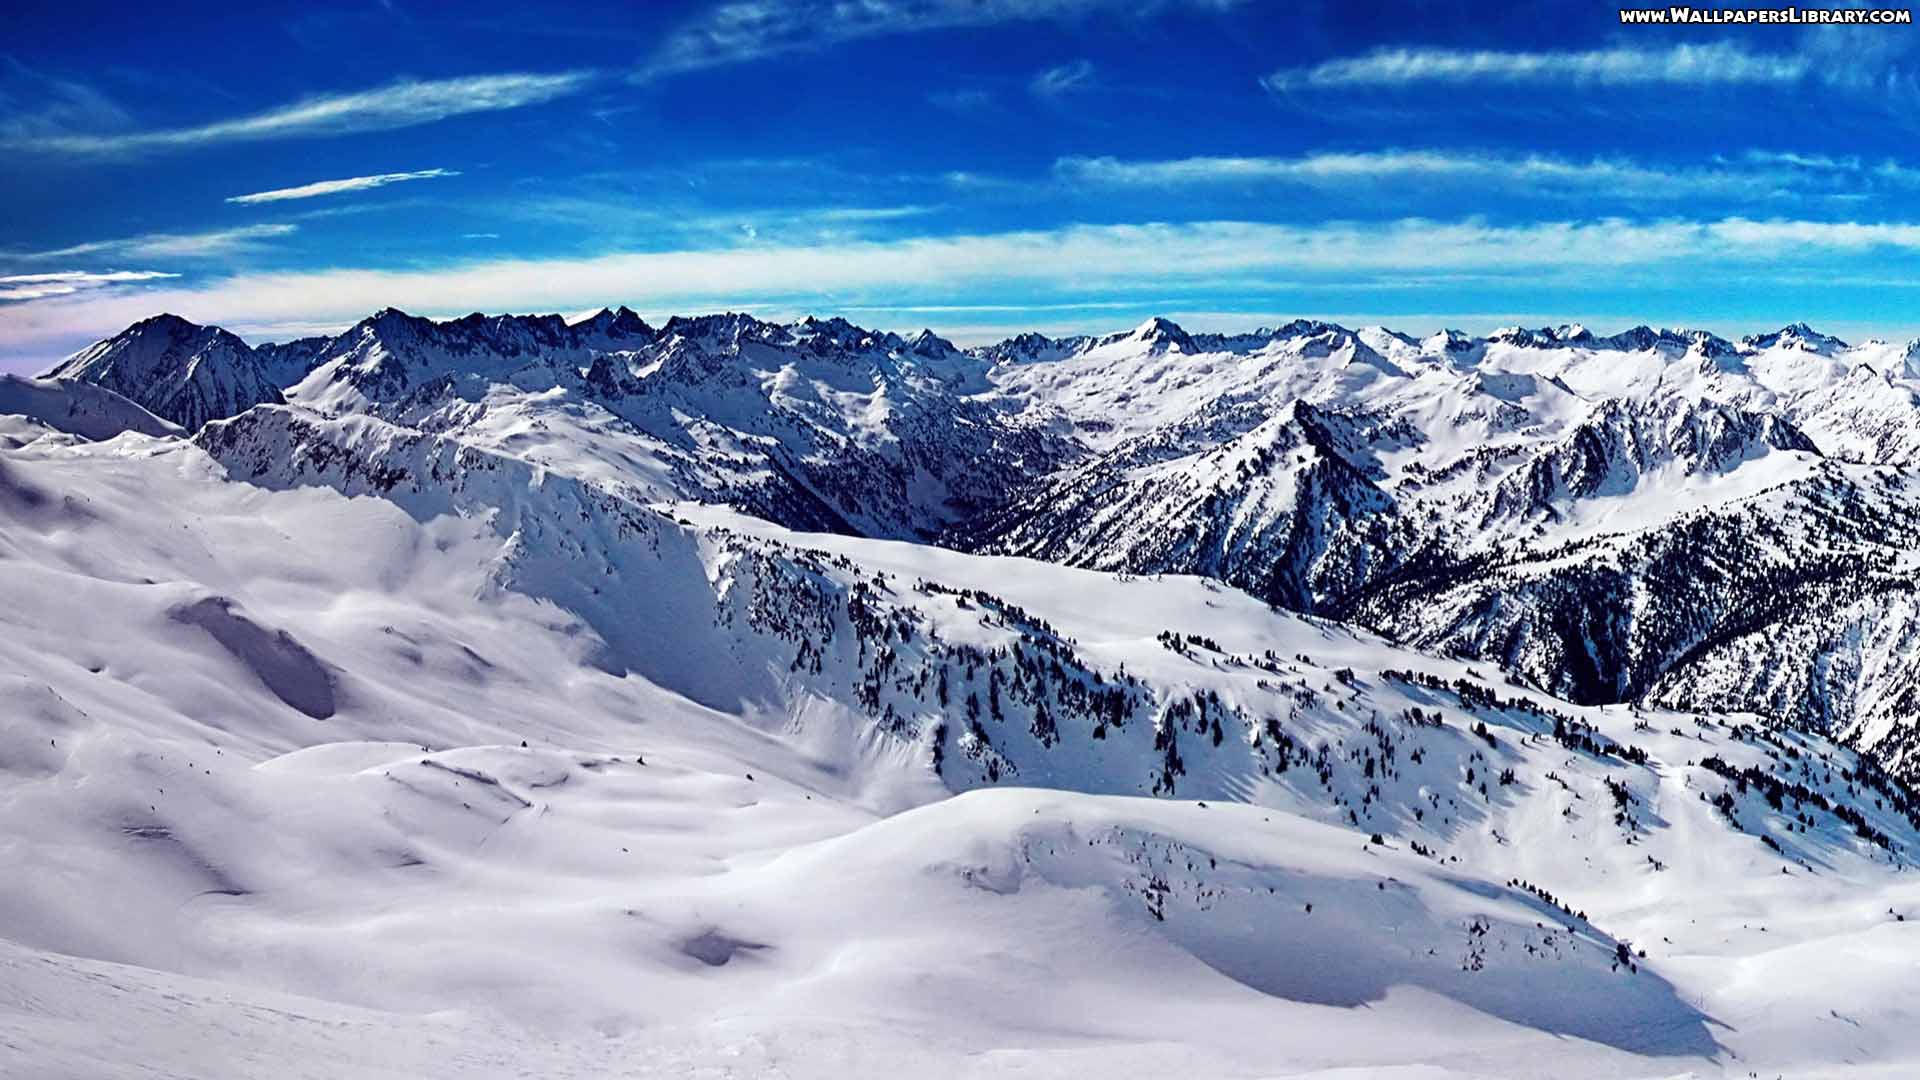 Snow Mountain Wallpaper High Definition For Free Wallpaper   Snow